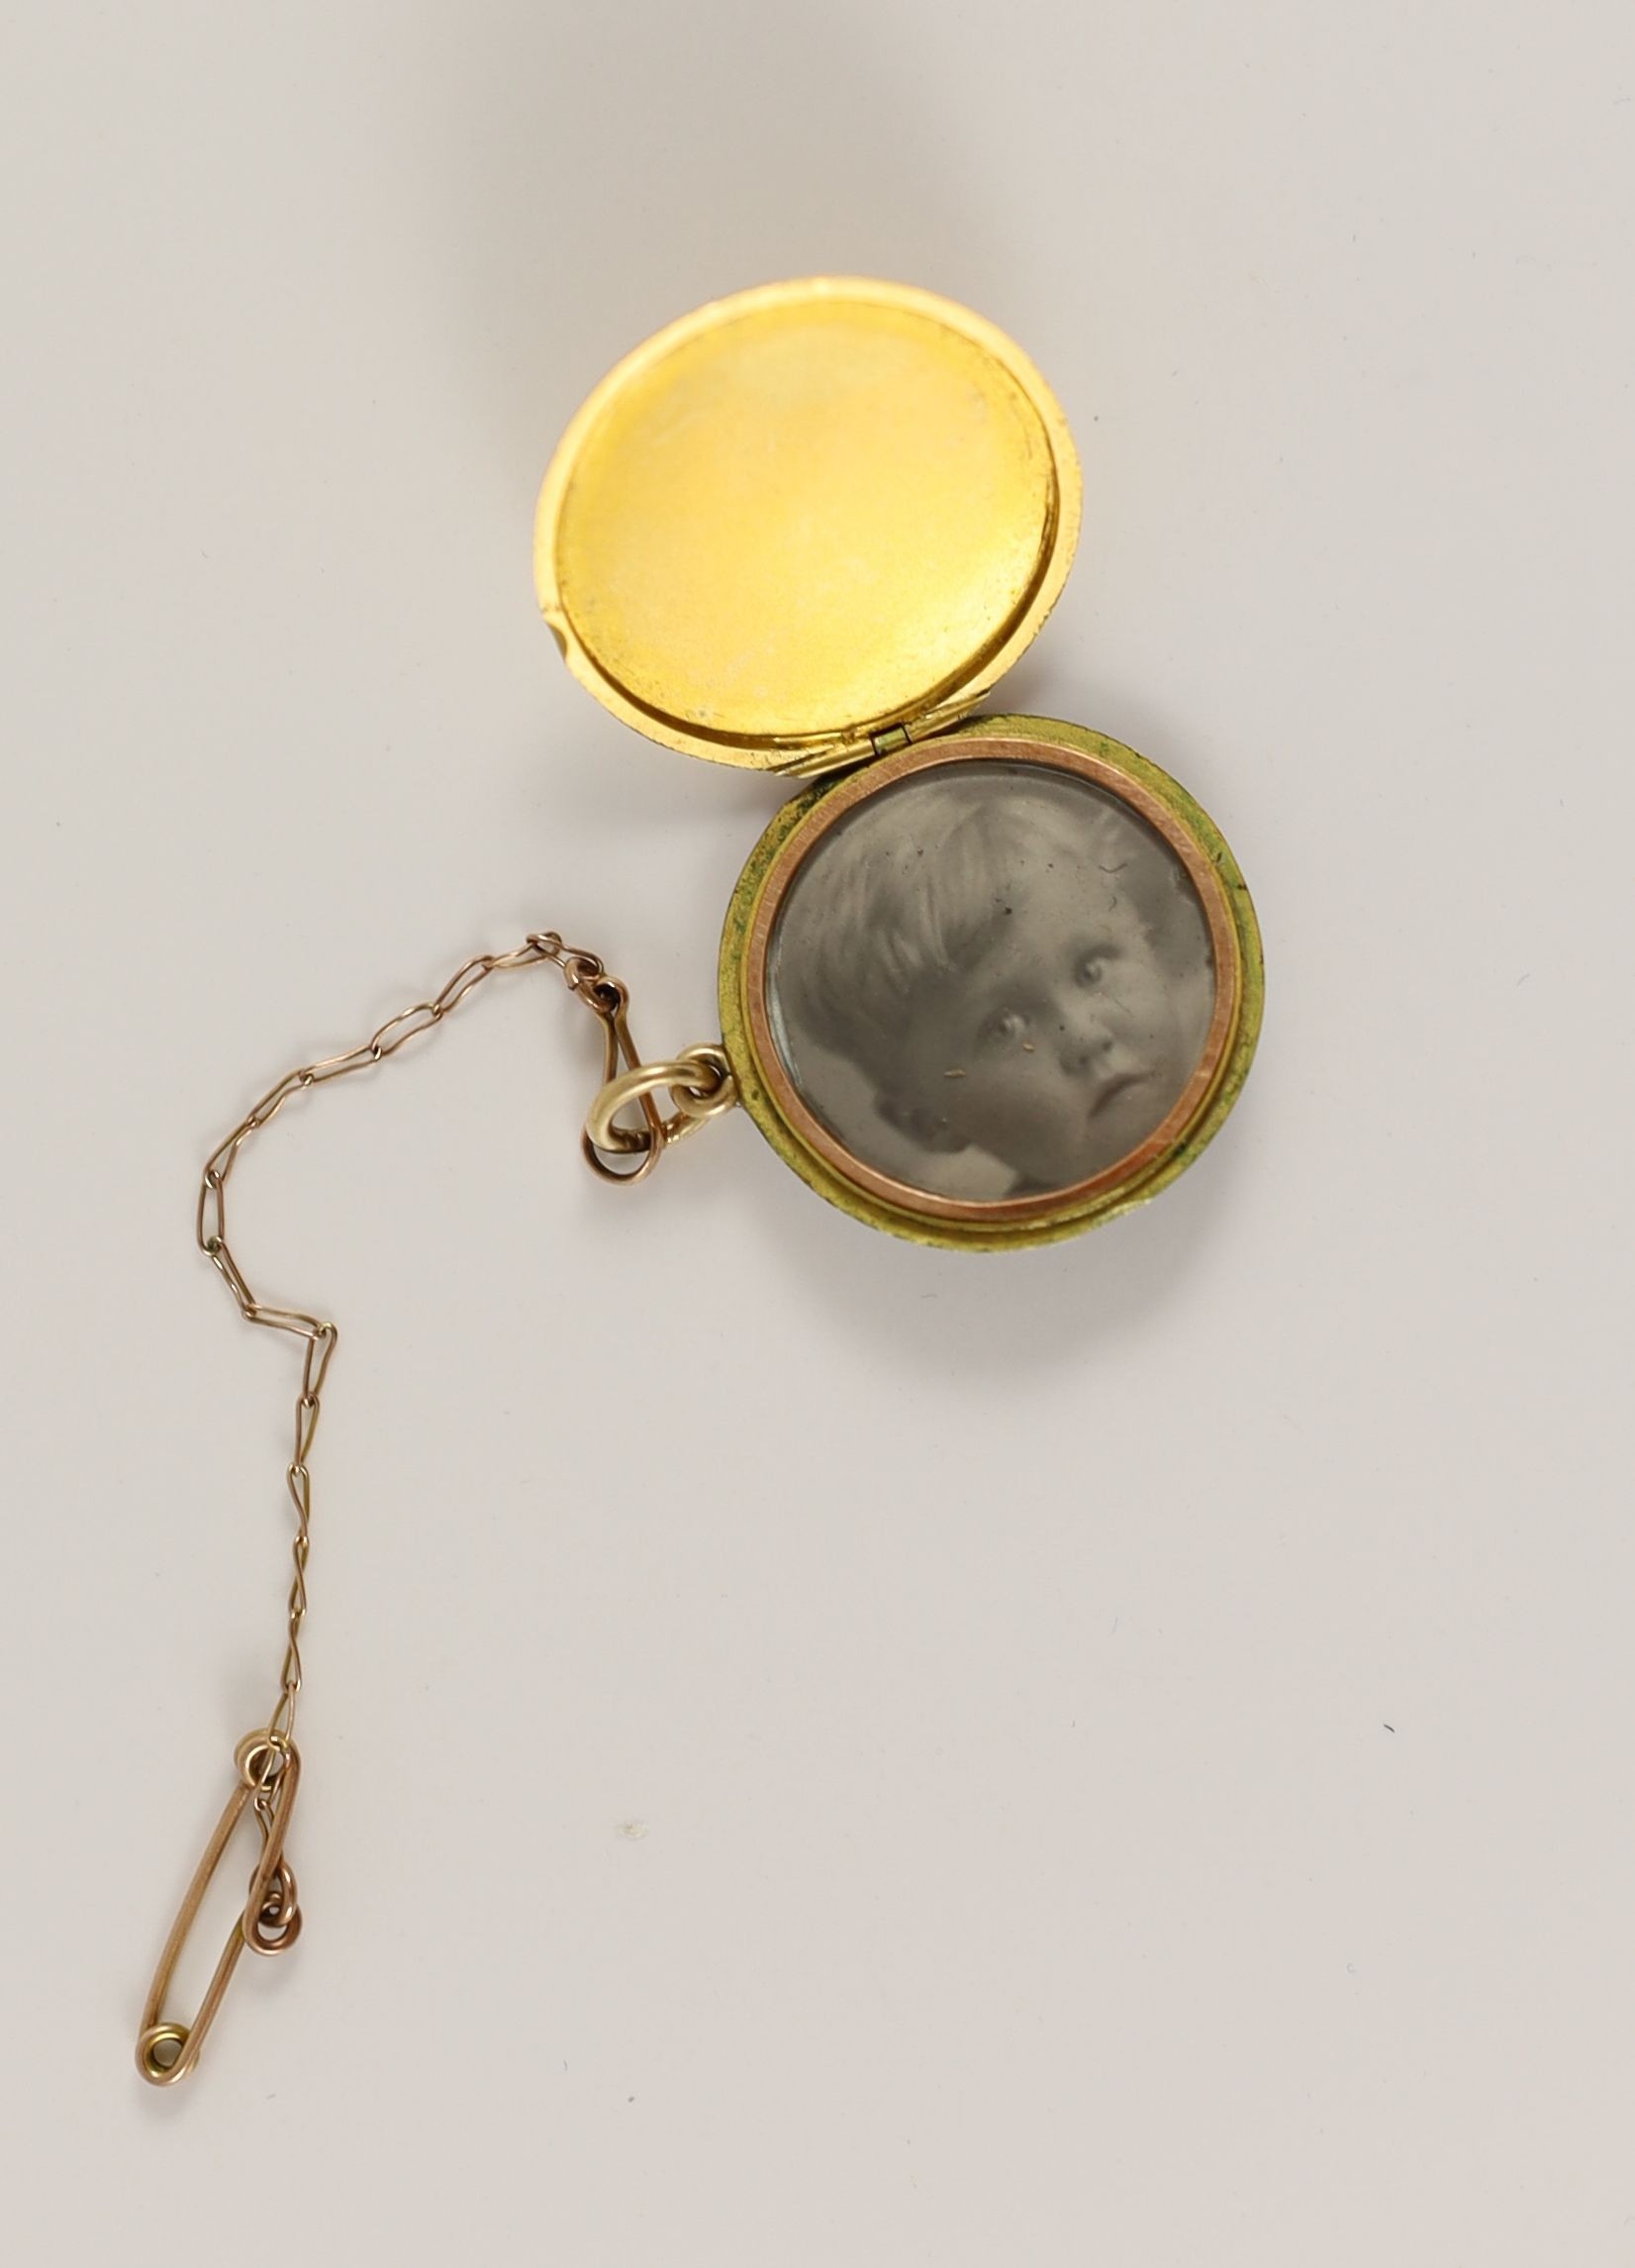 An Edwardian engine turned gold, blue guilloche enamel with gilded scrolls and diamond set circular pendant locket